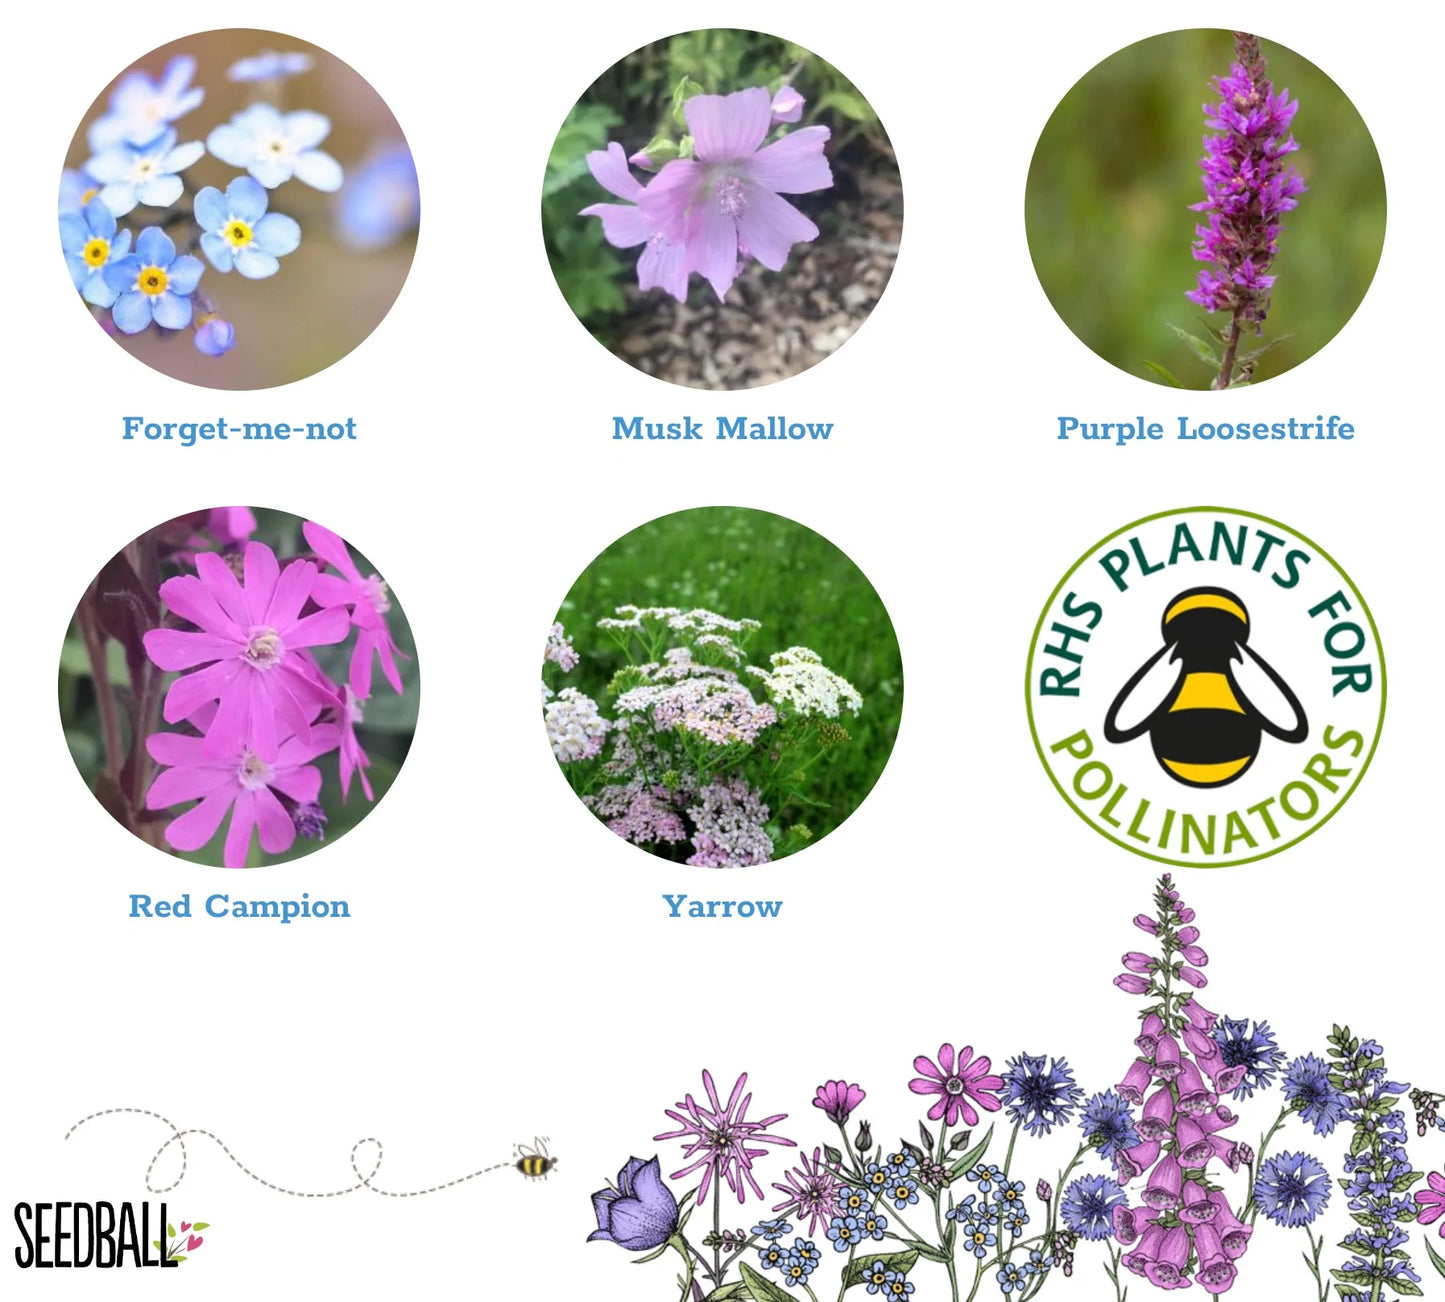 White background graphic with round photographs of the five flowers in the seedballs. From top left to right its, forget-me-not, musk mallow, purple loosestrife, red campion, yarrow.